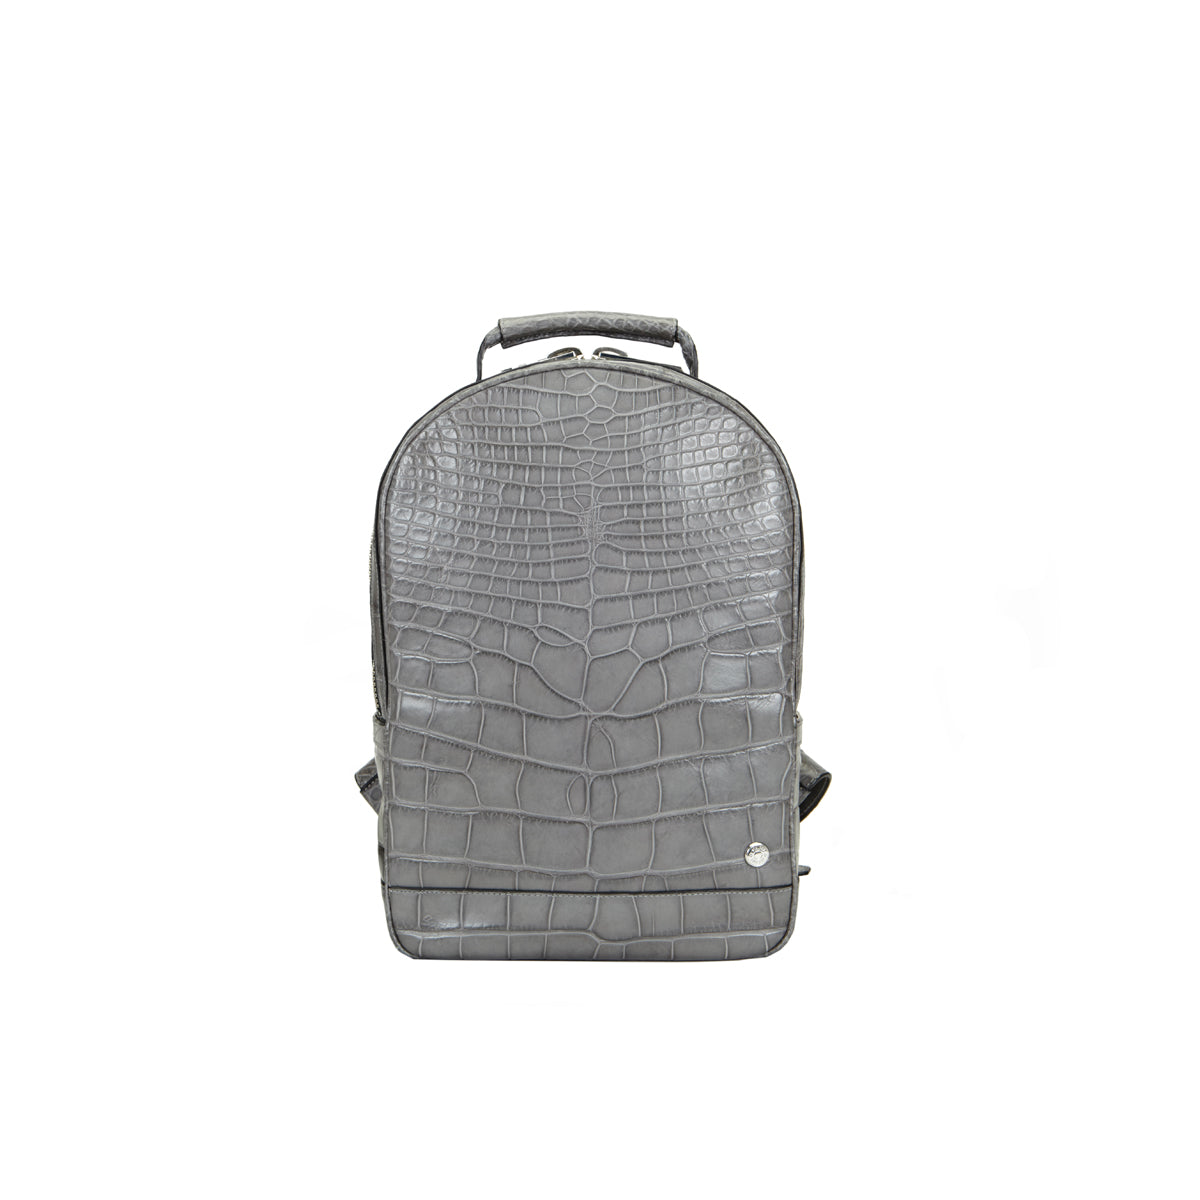 STALVEY Brighton Flat Front Backpack in Medium Grey Alligator Front View